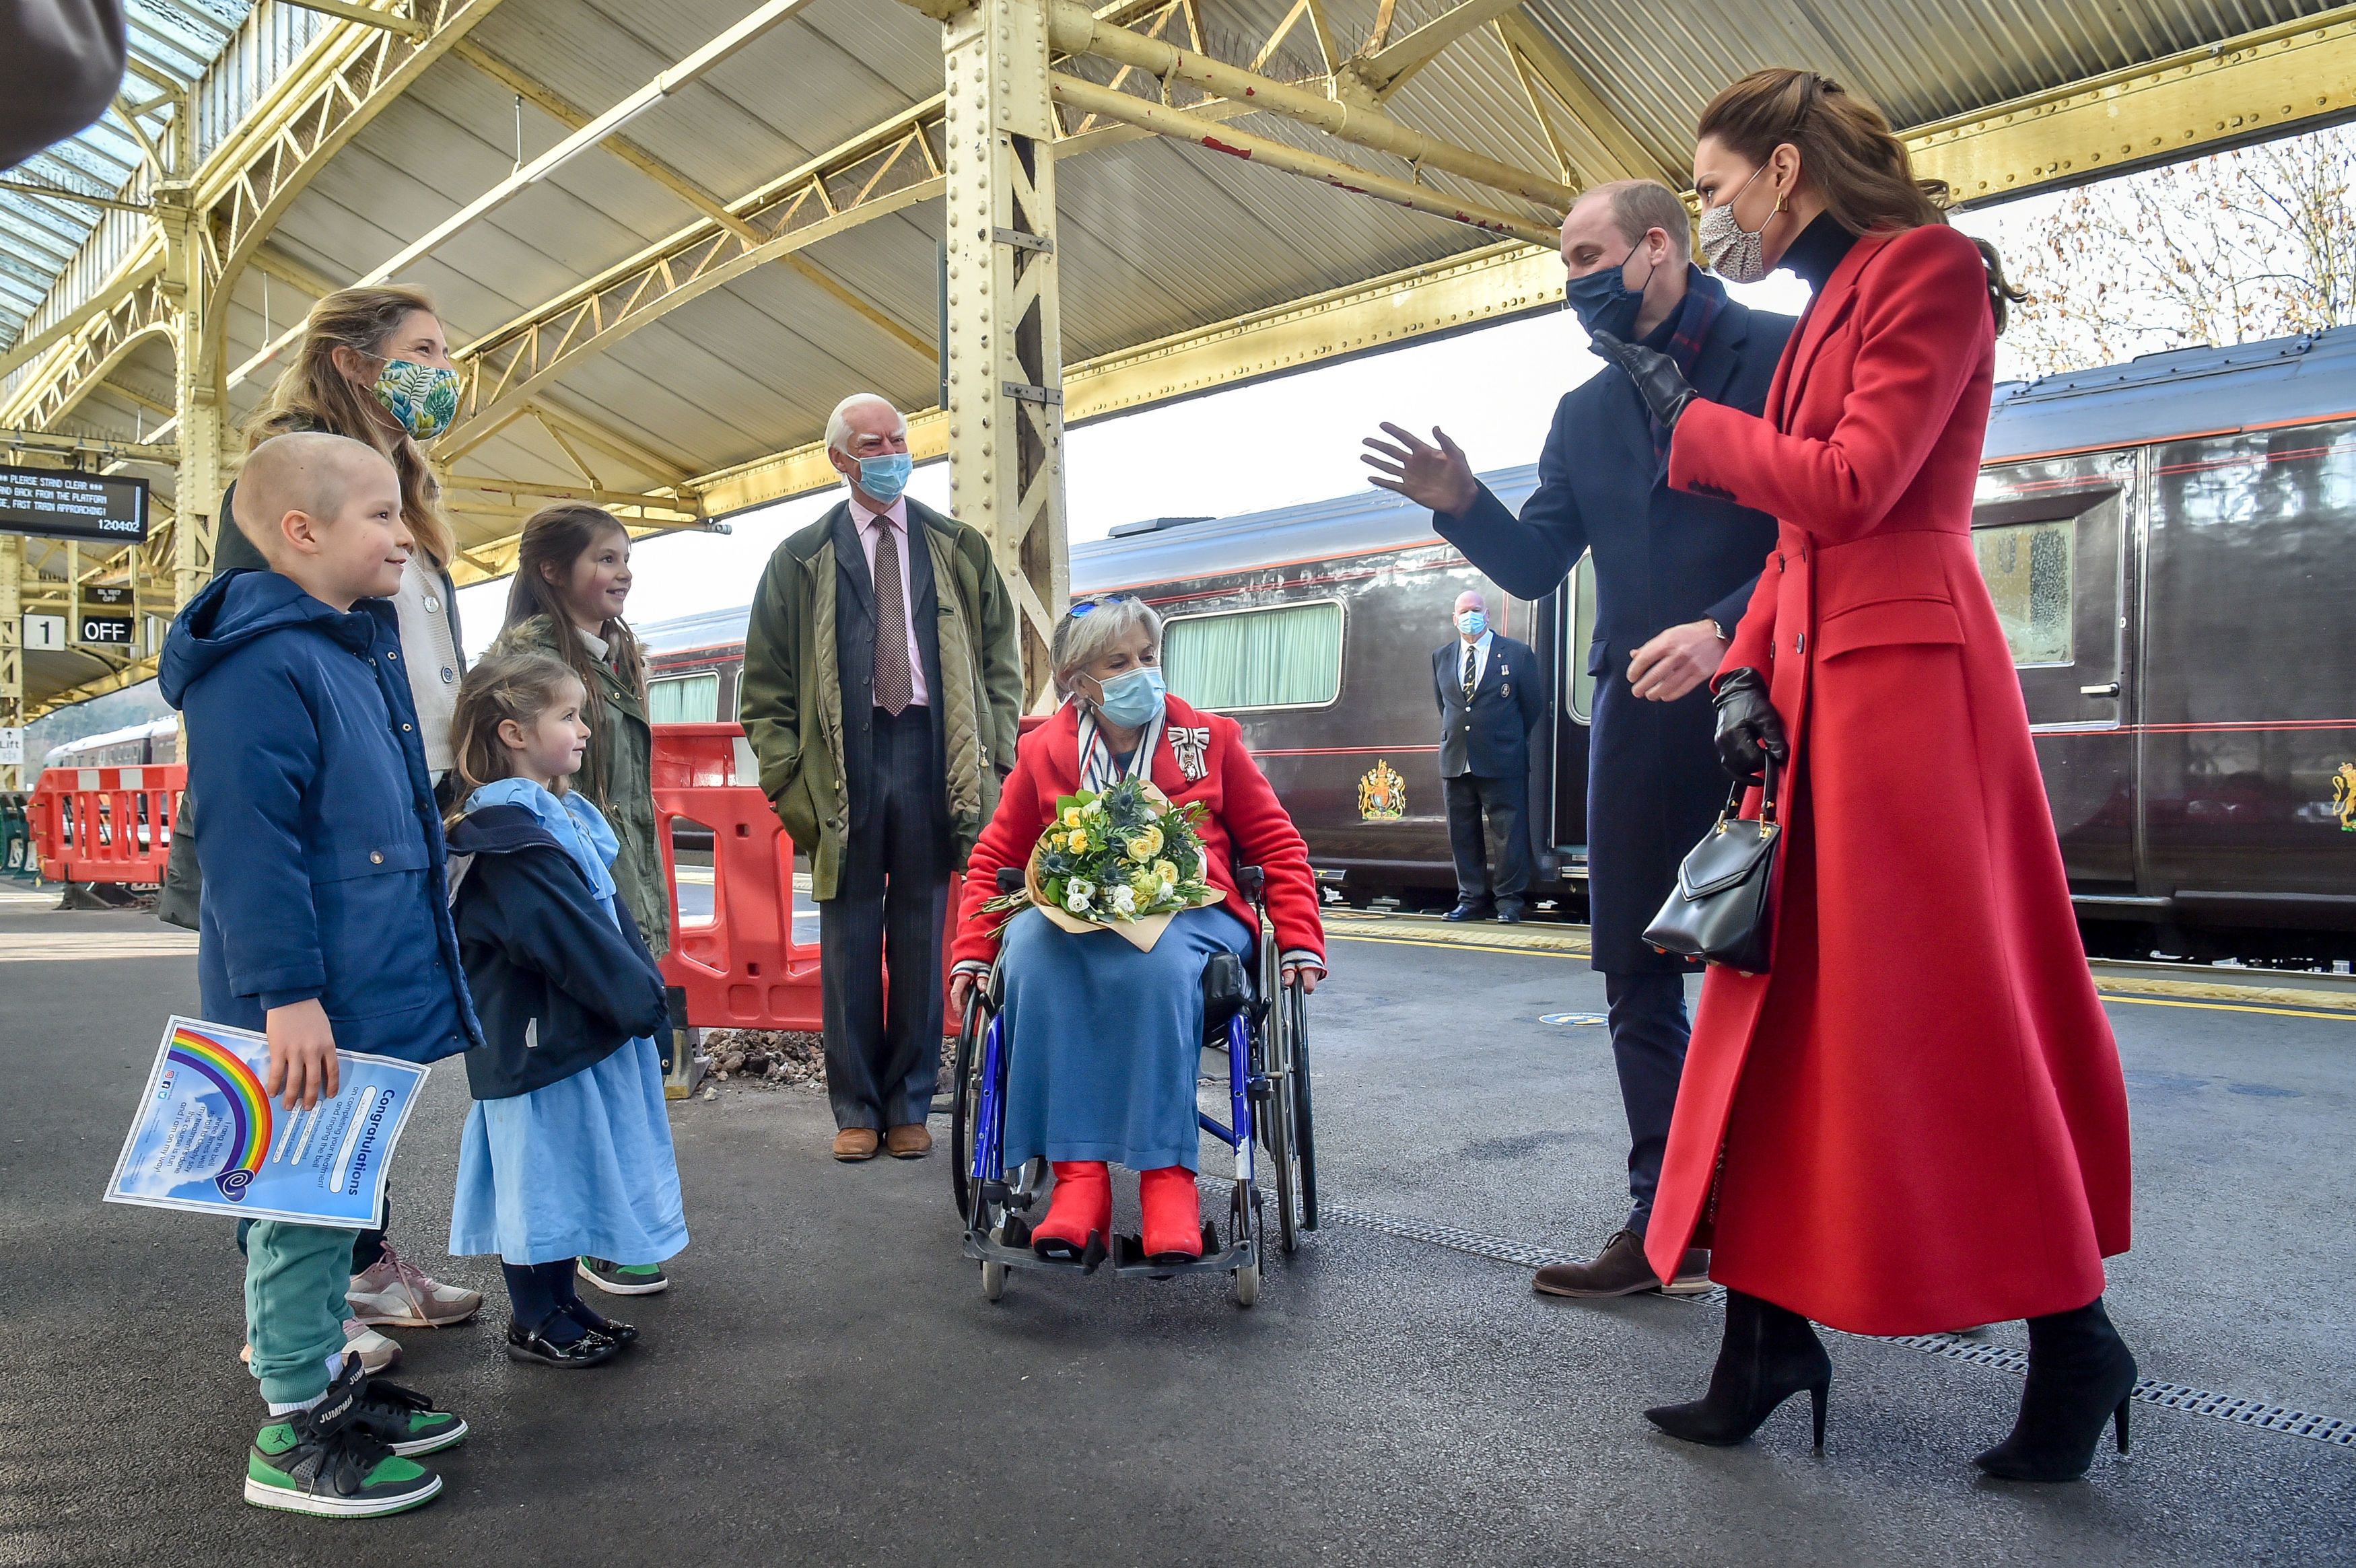 Kensington Palace Responds to Claims That William and Kate Ignored Calls to Postpone Their Train Tour